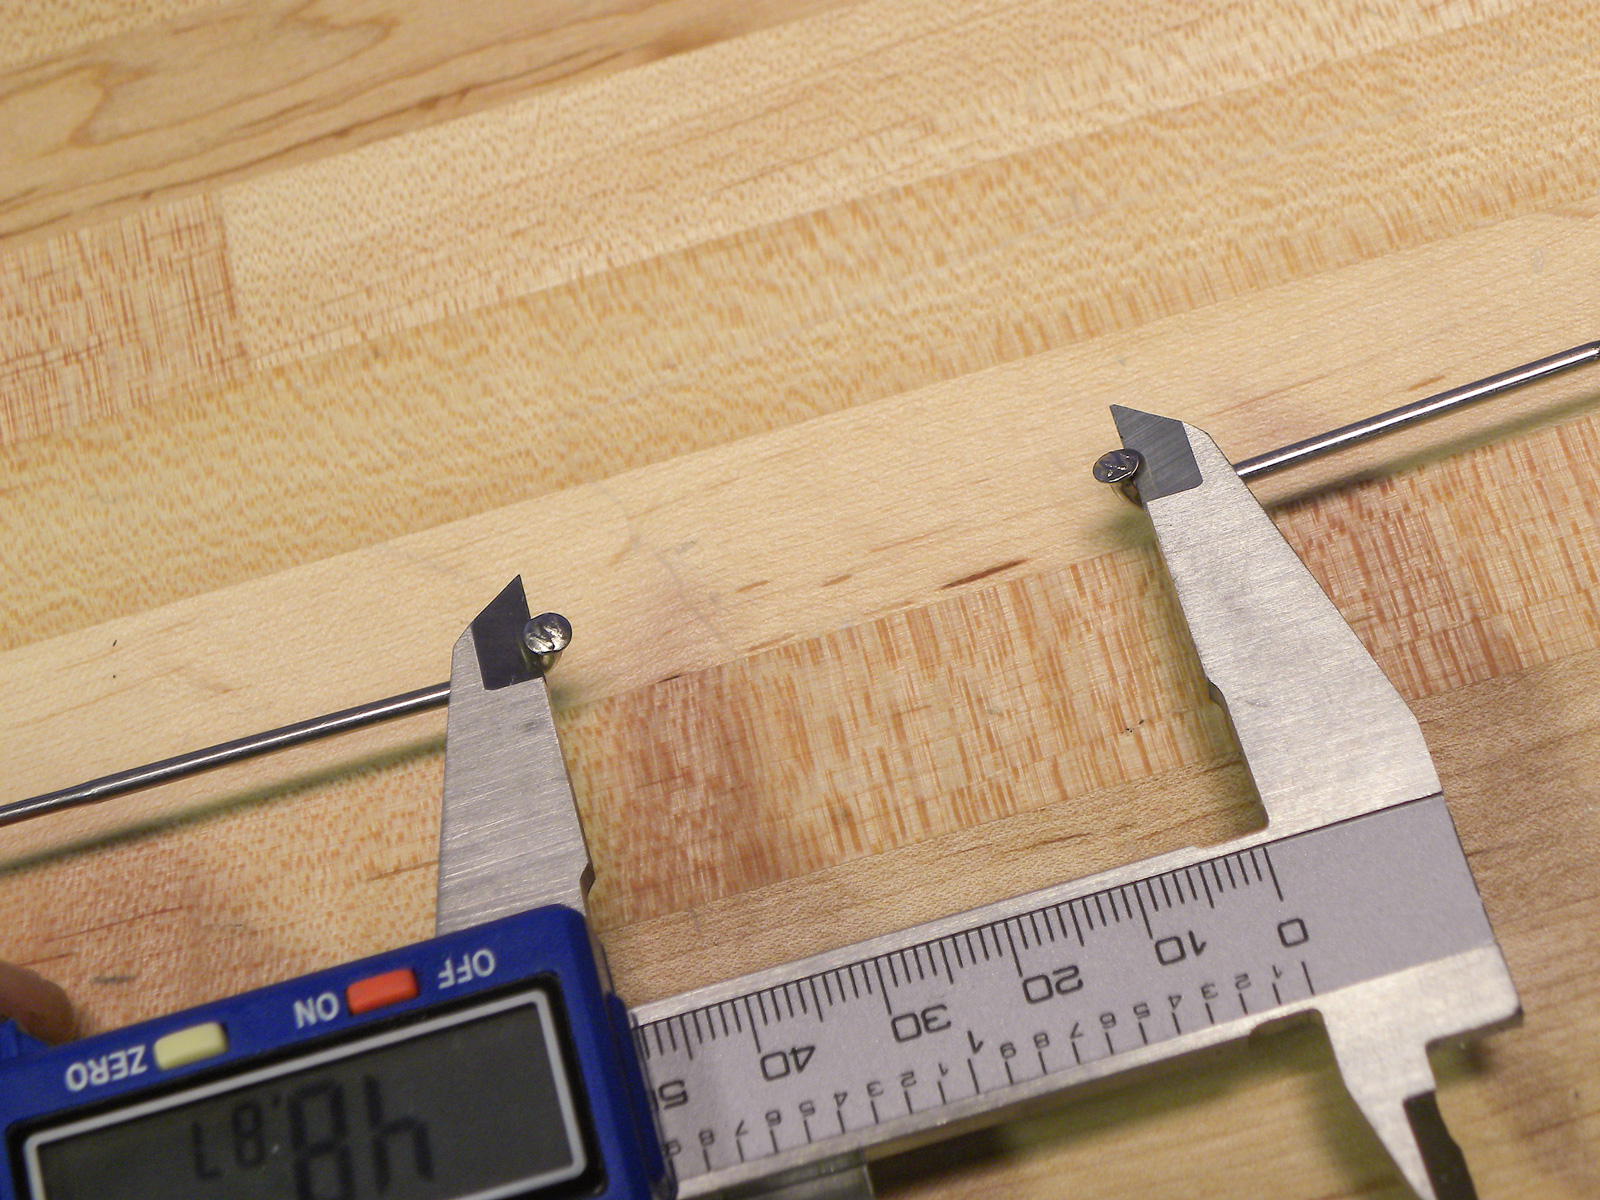 Measure from J-bend to J-bend using calipers, keeping caliper parallel to spokes